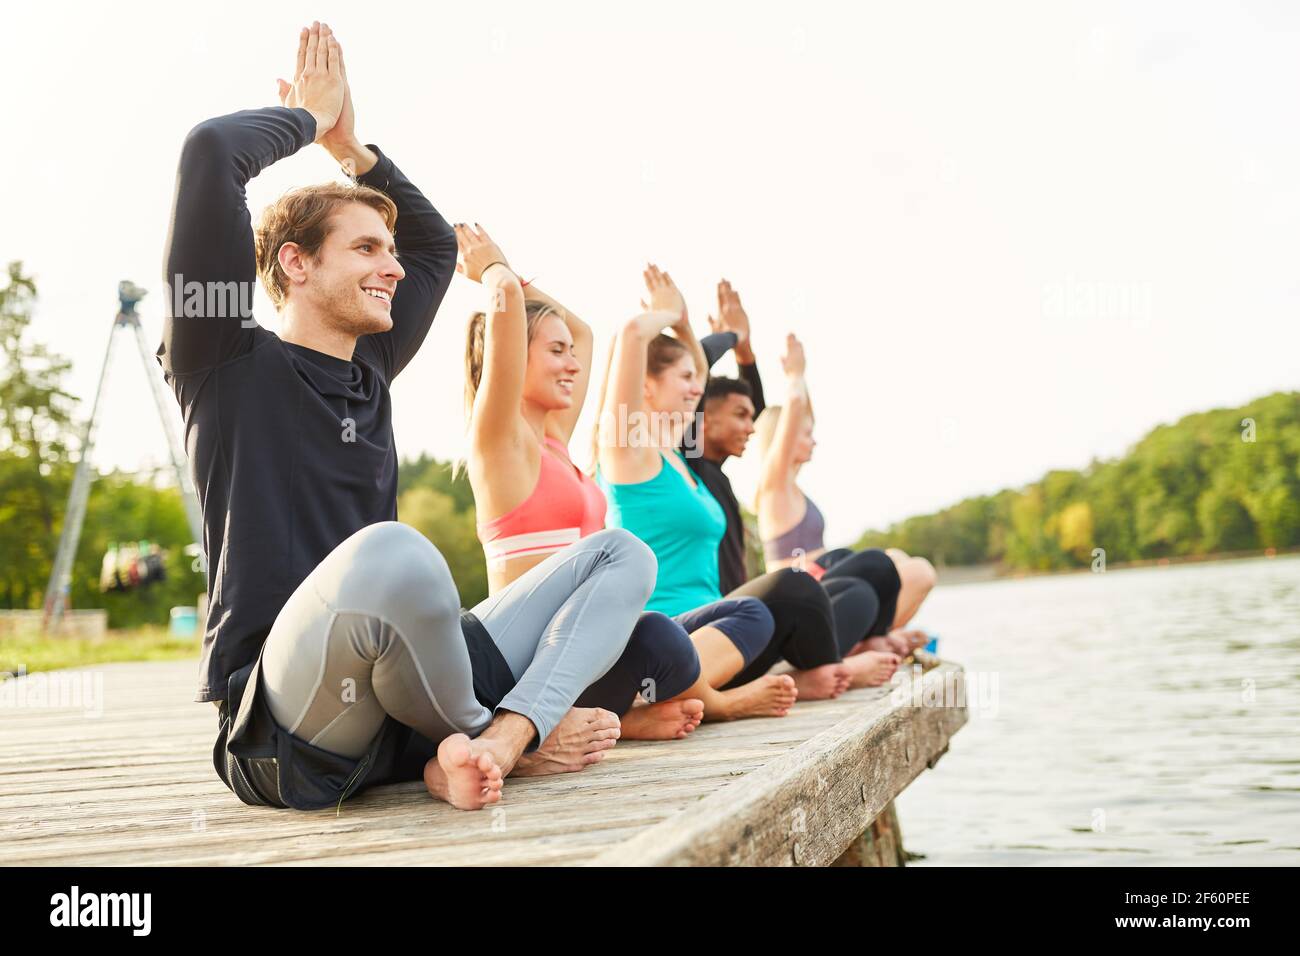 Friends doing yoga exercise together on the lakeside for relaxation and health Stock Photo